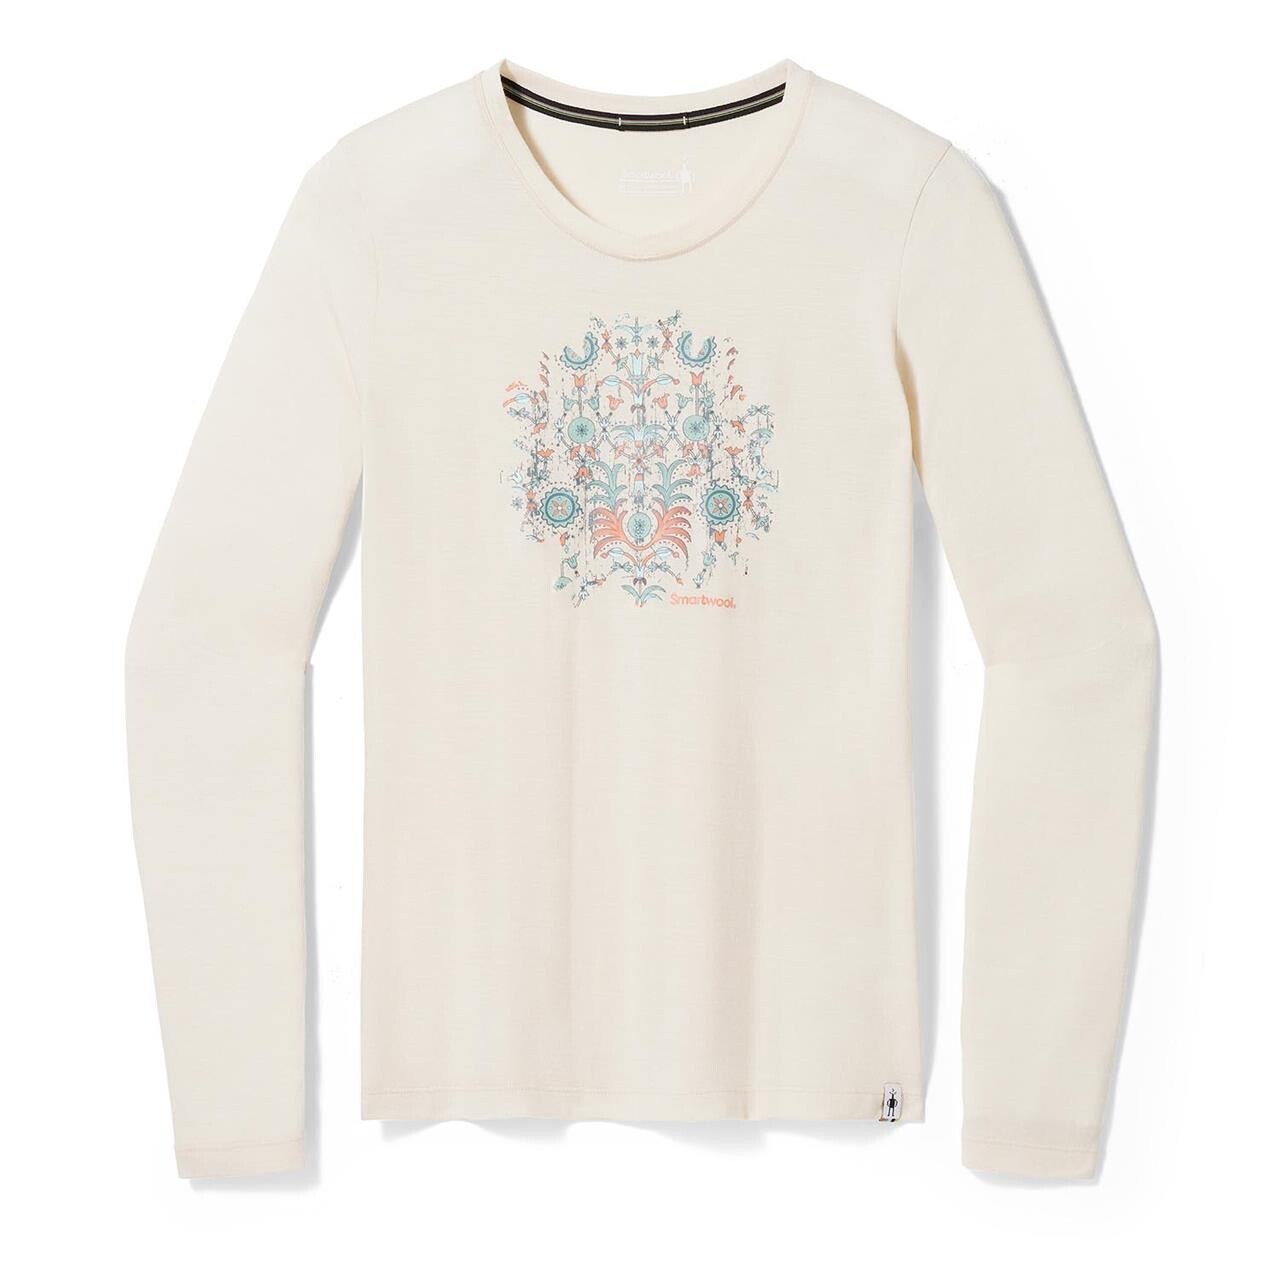 Billede af Smartwool Womens Floral Tundra Graphic L/S Tee (Beige (ALMOND HEATHER) Small)